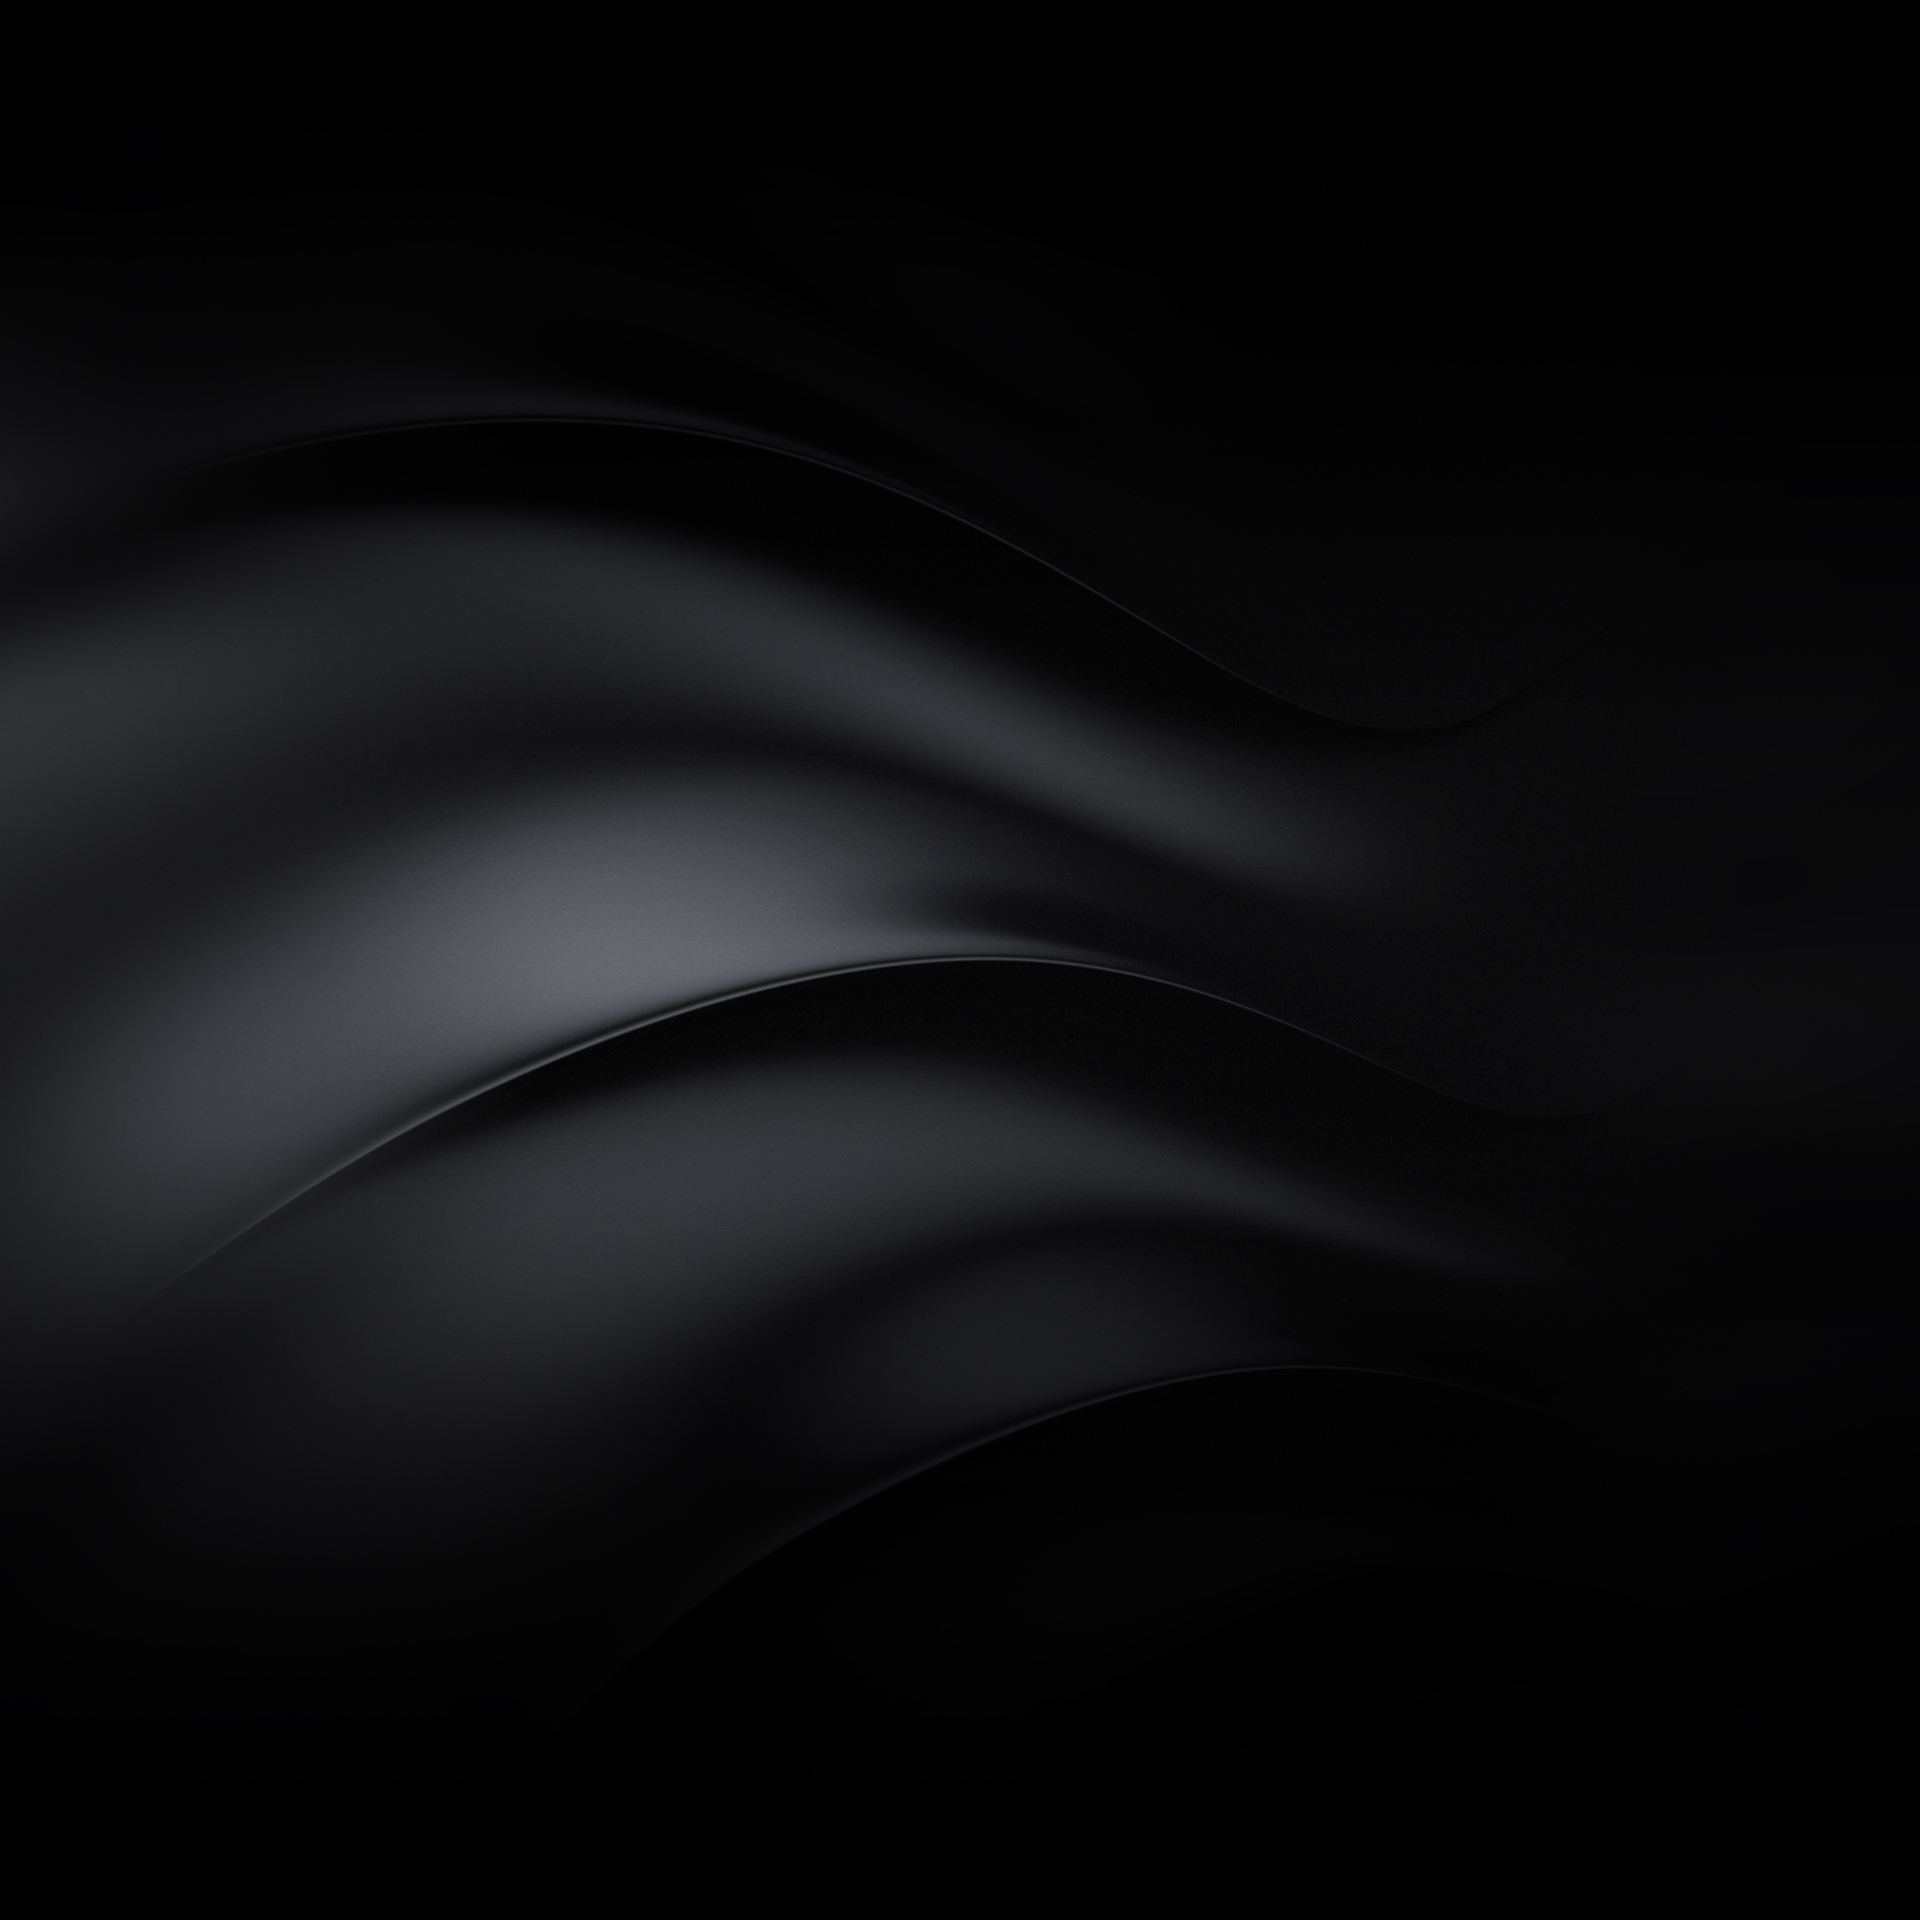 Black Huawei Logo Wallpaper Wallpaper Hd For Android